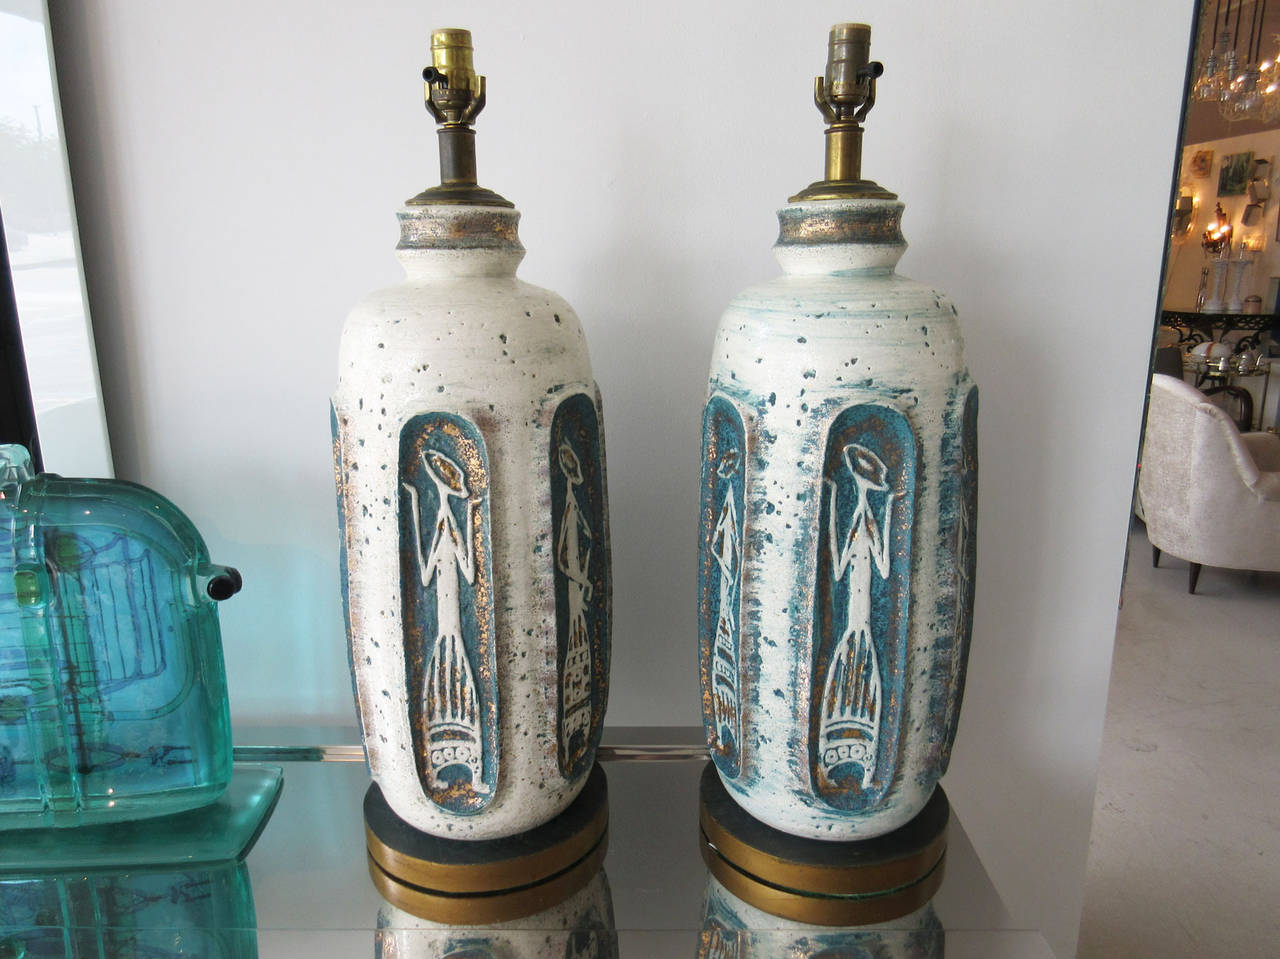 Pair of ceramic lamps in a tribal or Egyptian style signed by American artist 